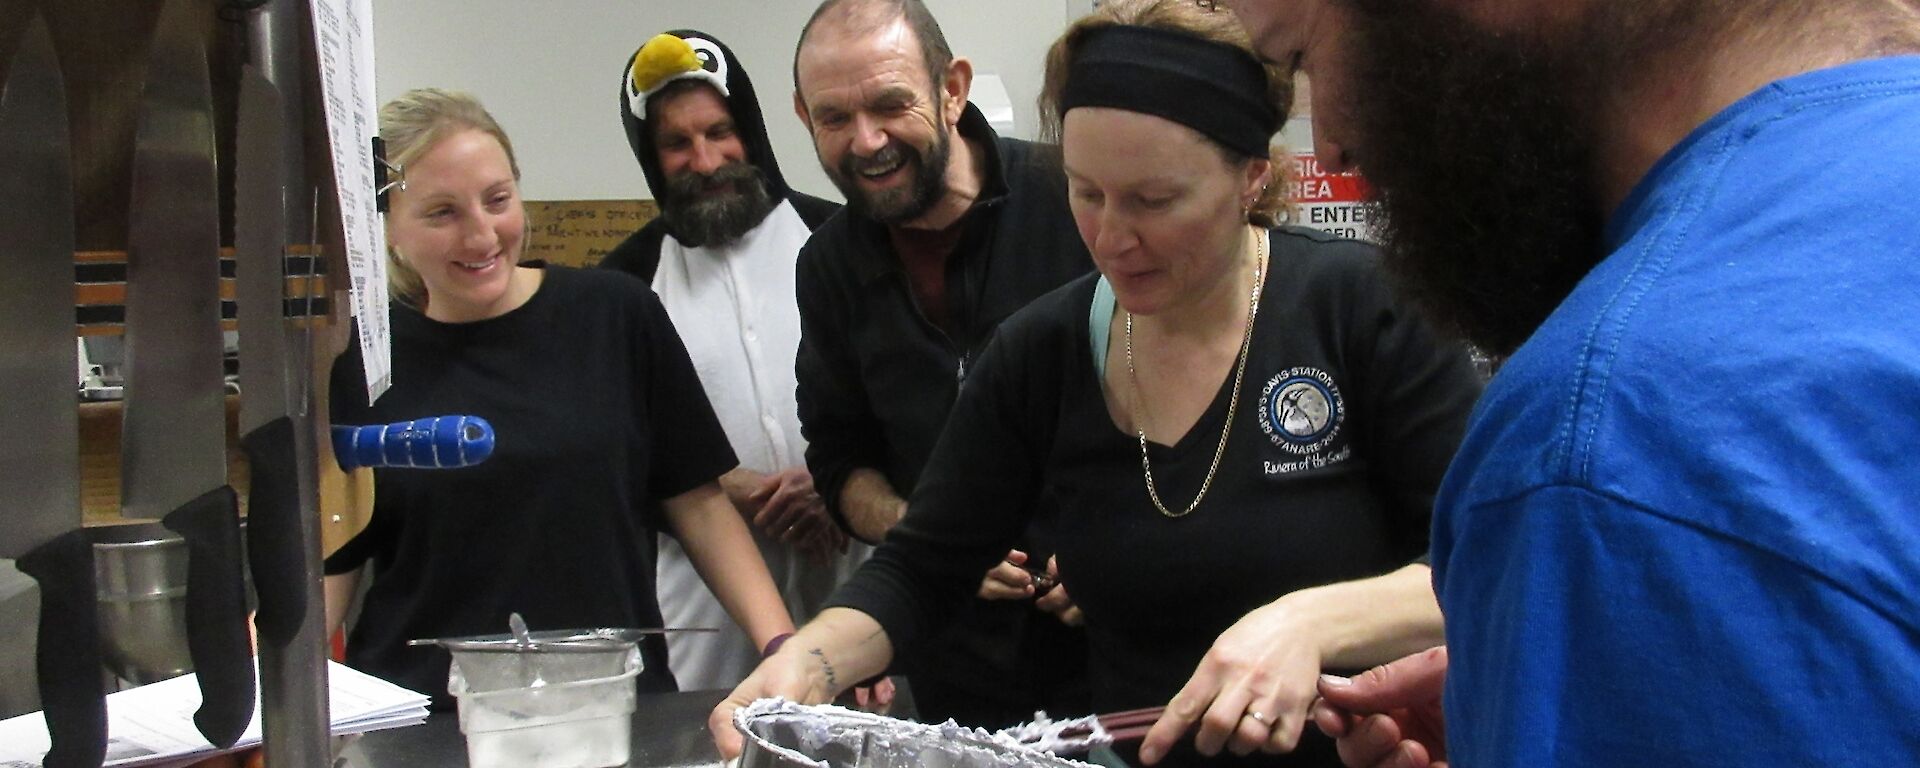 Two female and three male expeditioners making marshmallows in a stainless steel commercial kitchen. One man is dressed as a penguin.